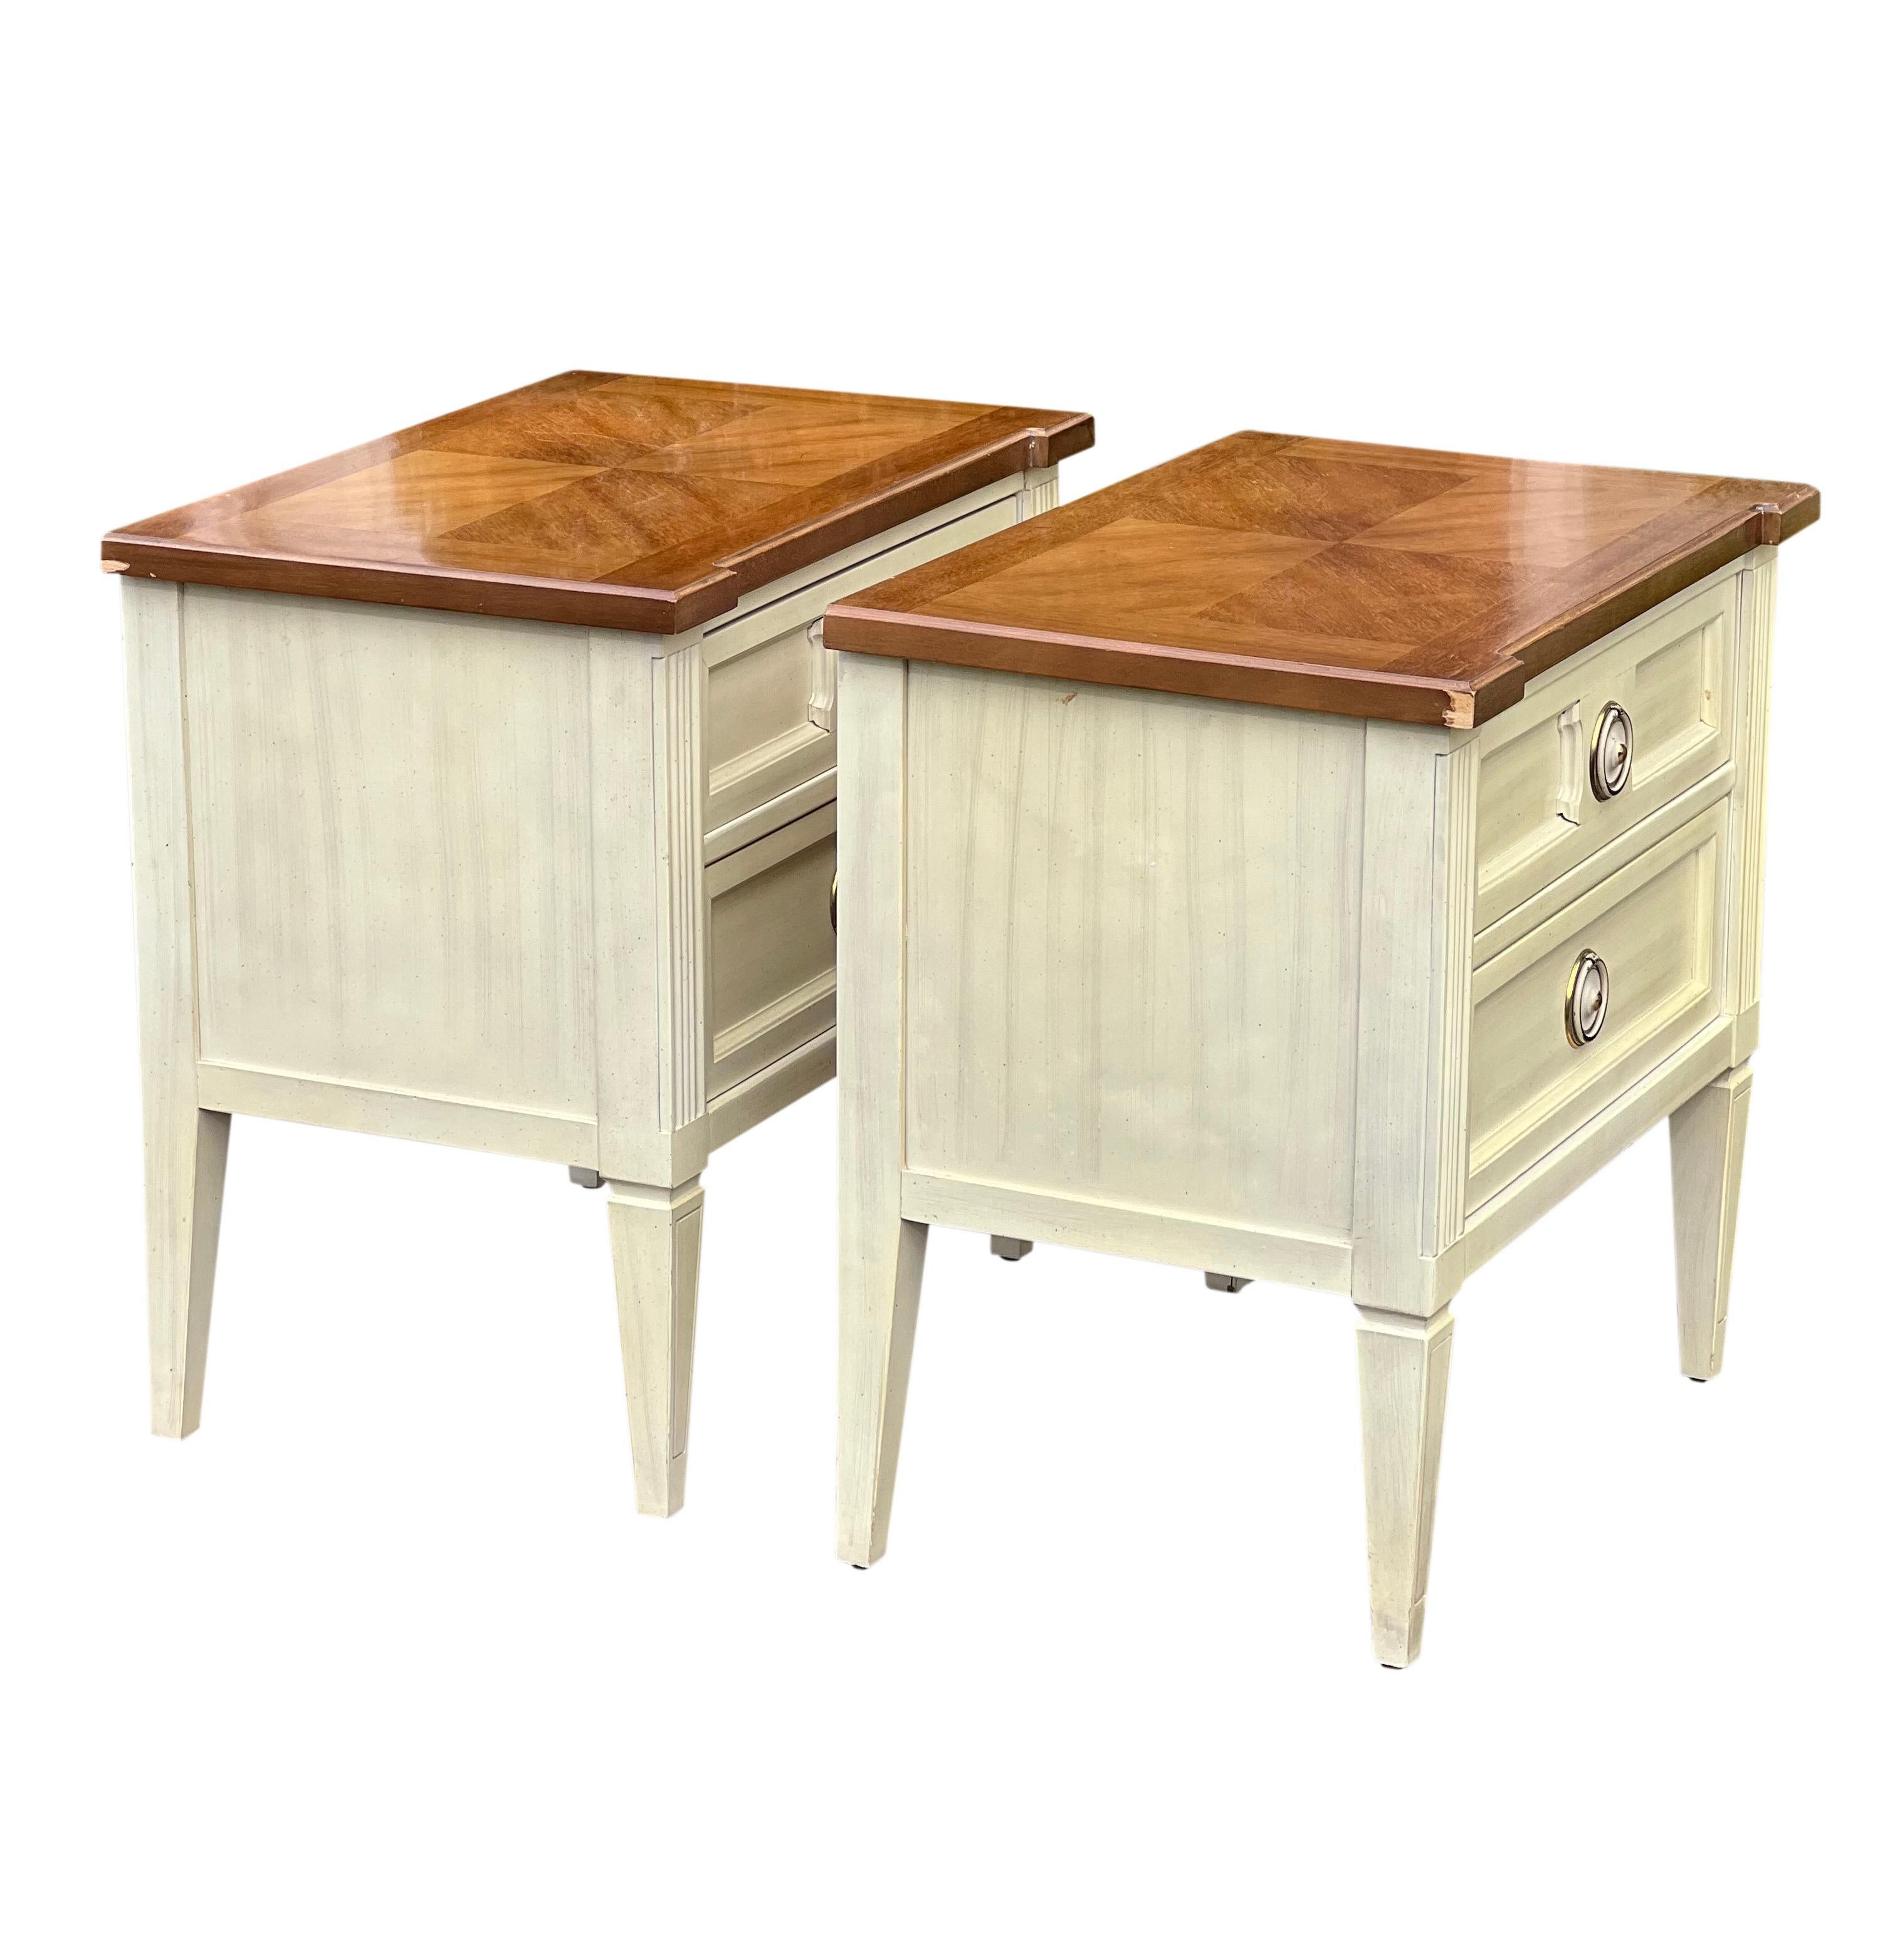 Neoclassical American of Martinsville Parquet Top White Nightstands, a Pair For Sale